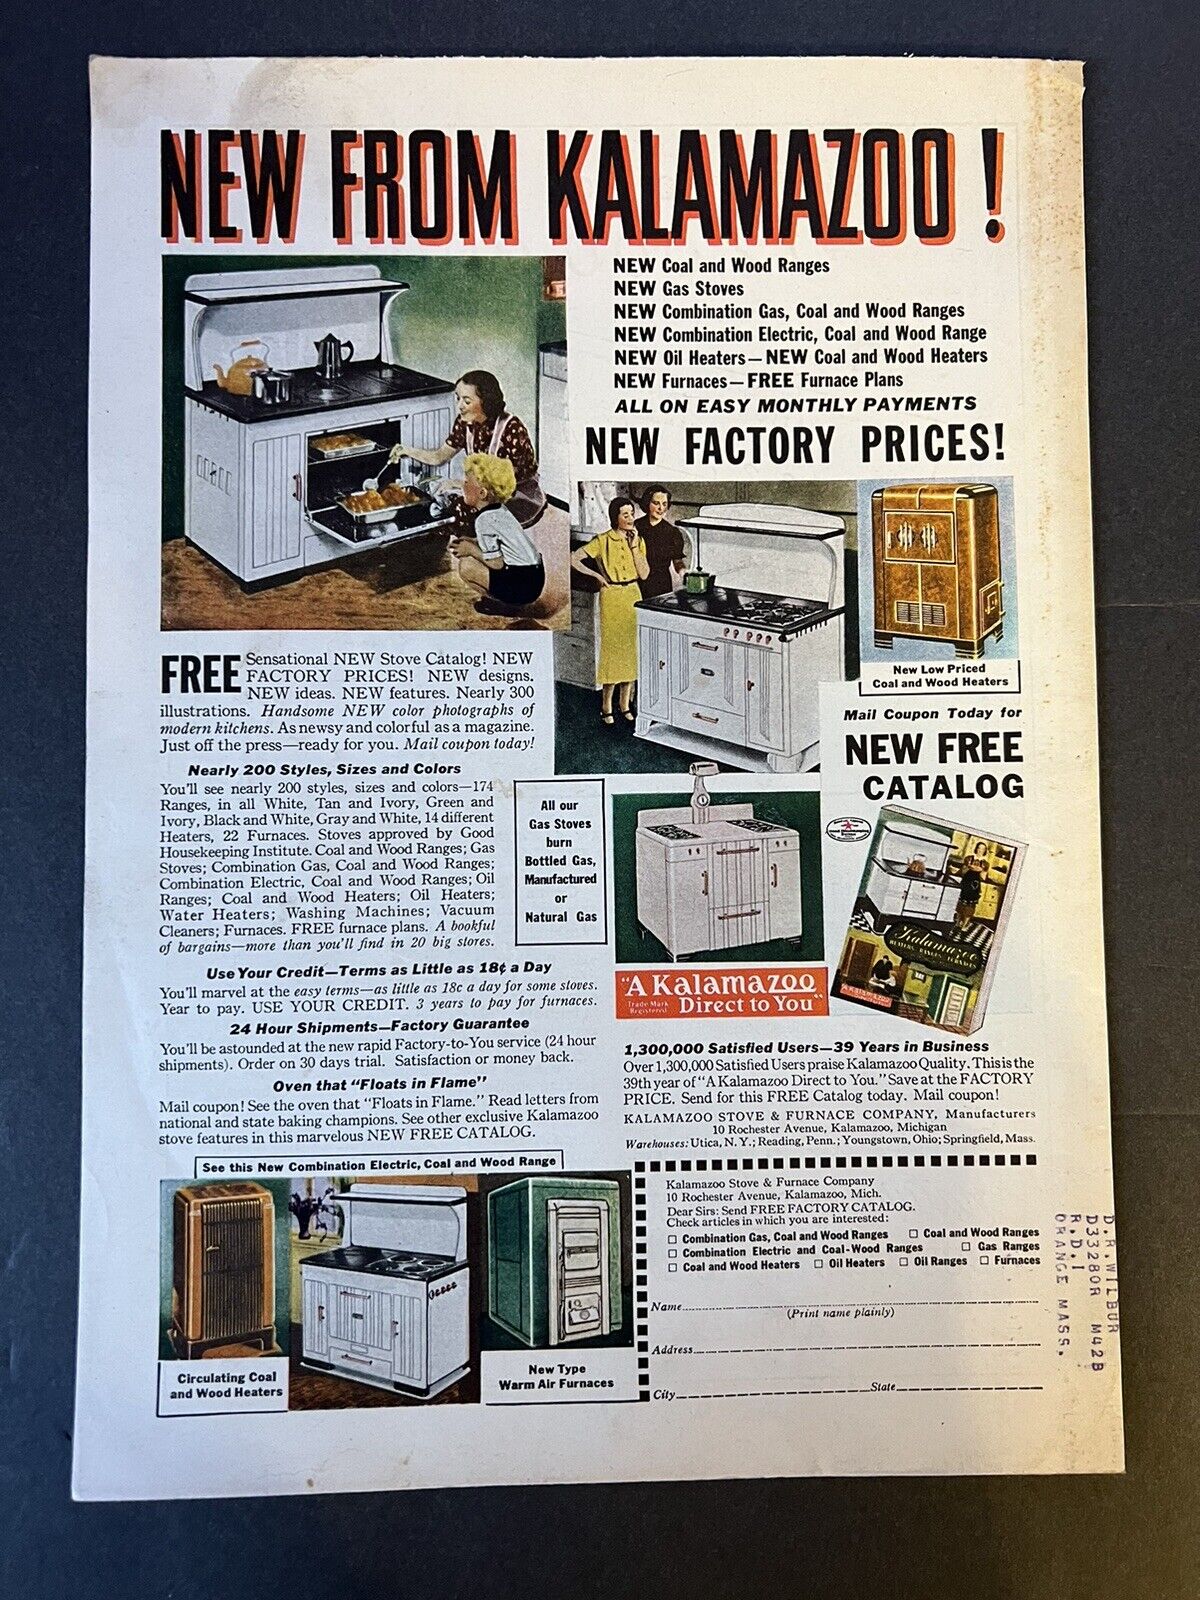 Vtg 1938 Kalamazoo Direct to you Appliance Ad with Mail in Offer